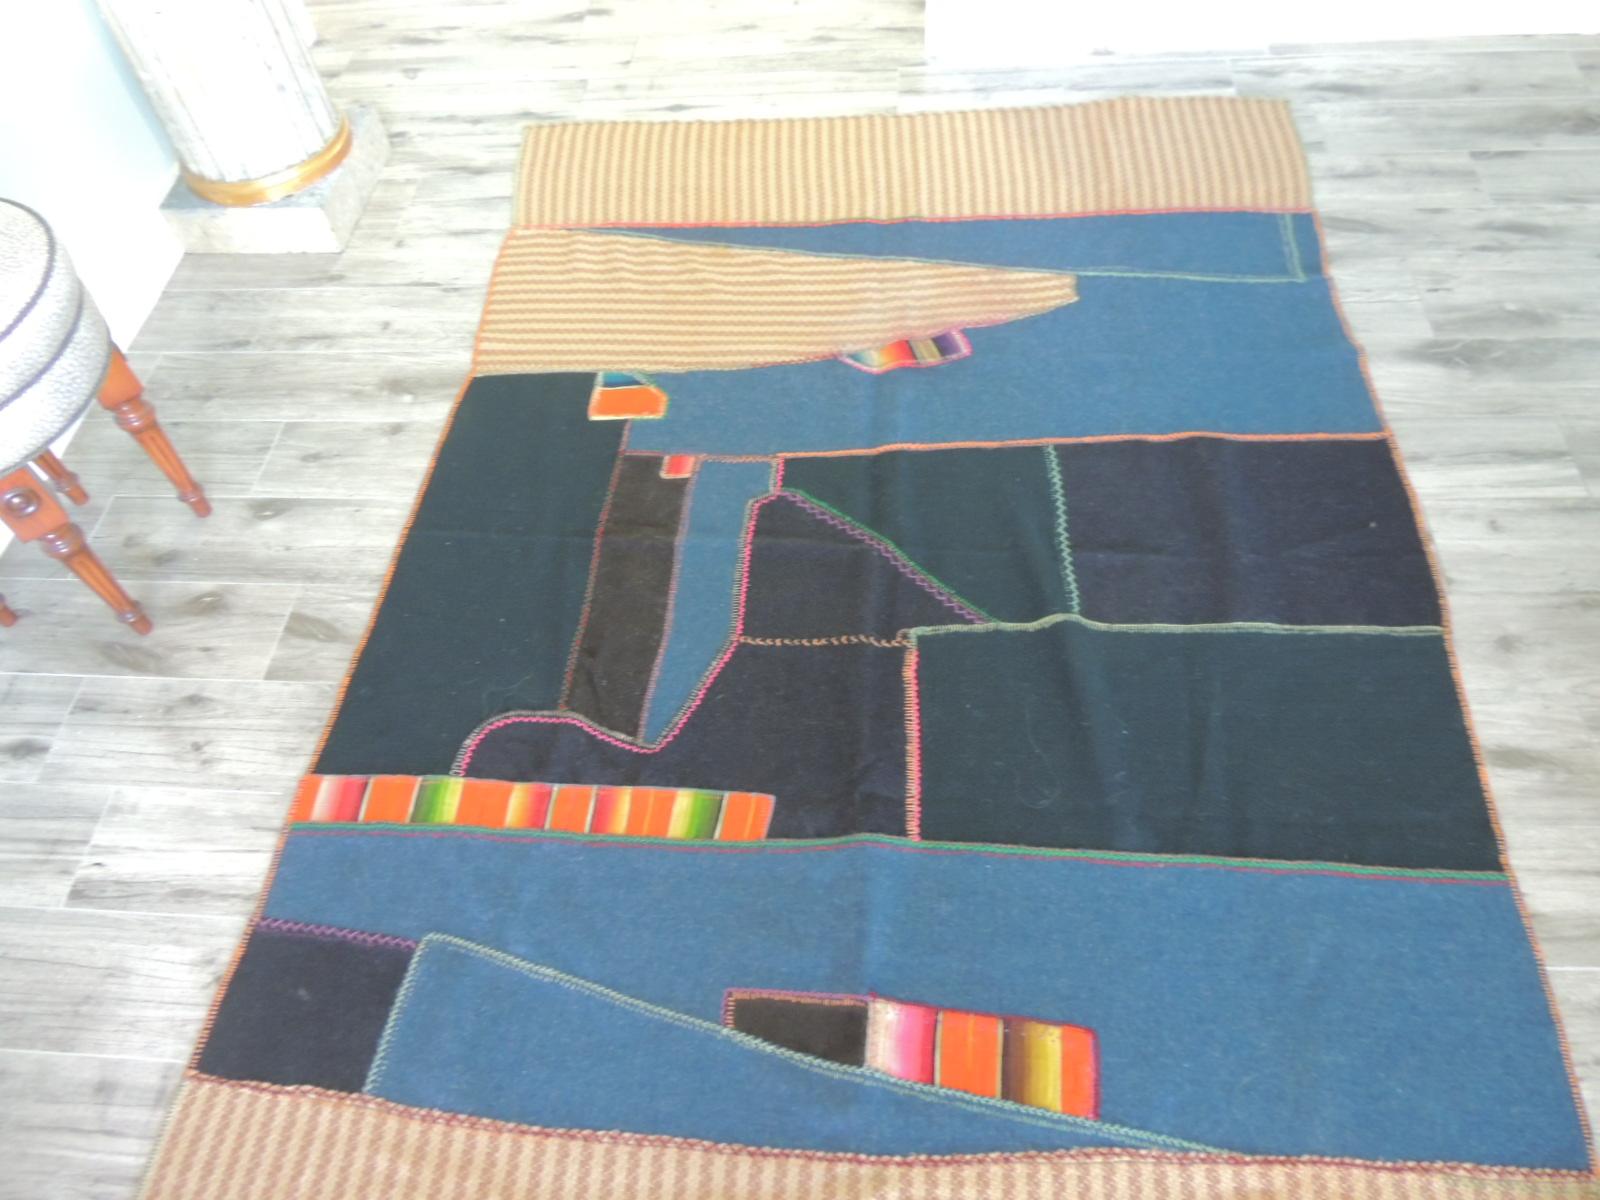 Vintage colorful patchwork throw or blanket.
Great tapestry or cloth.
Mixed textiles and wool.
Size: 54